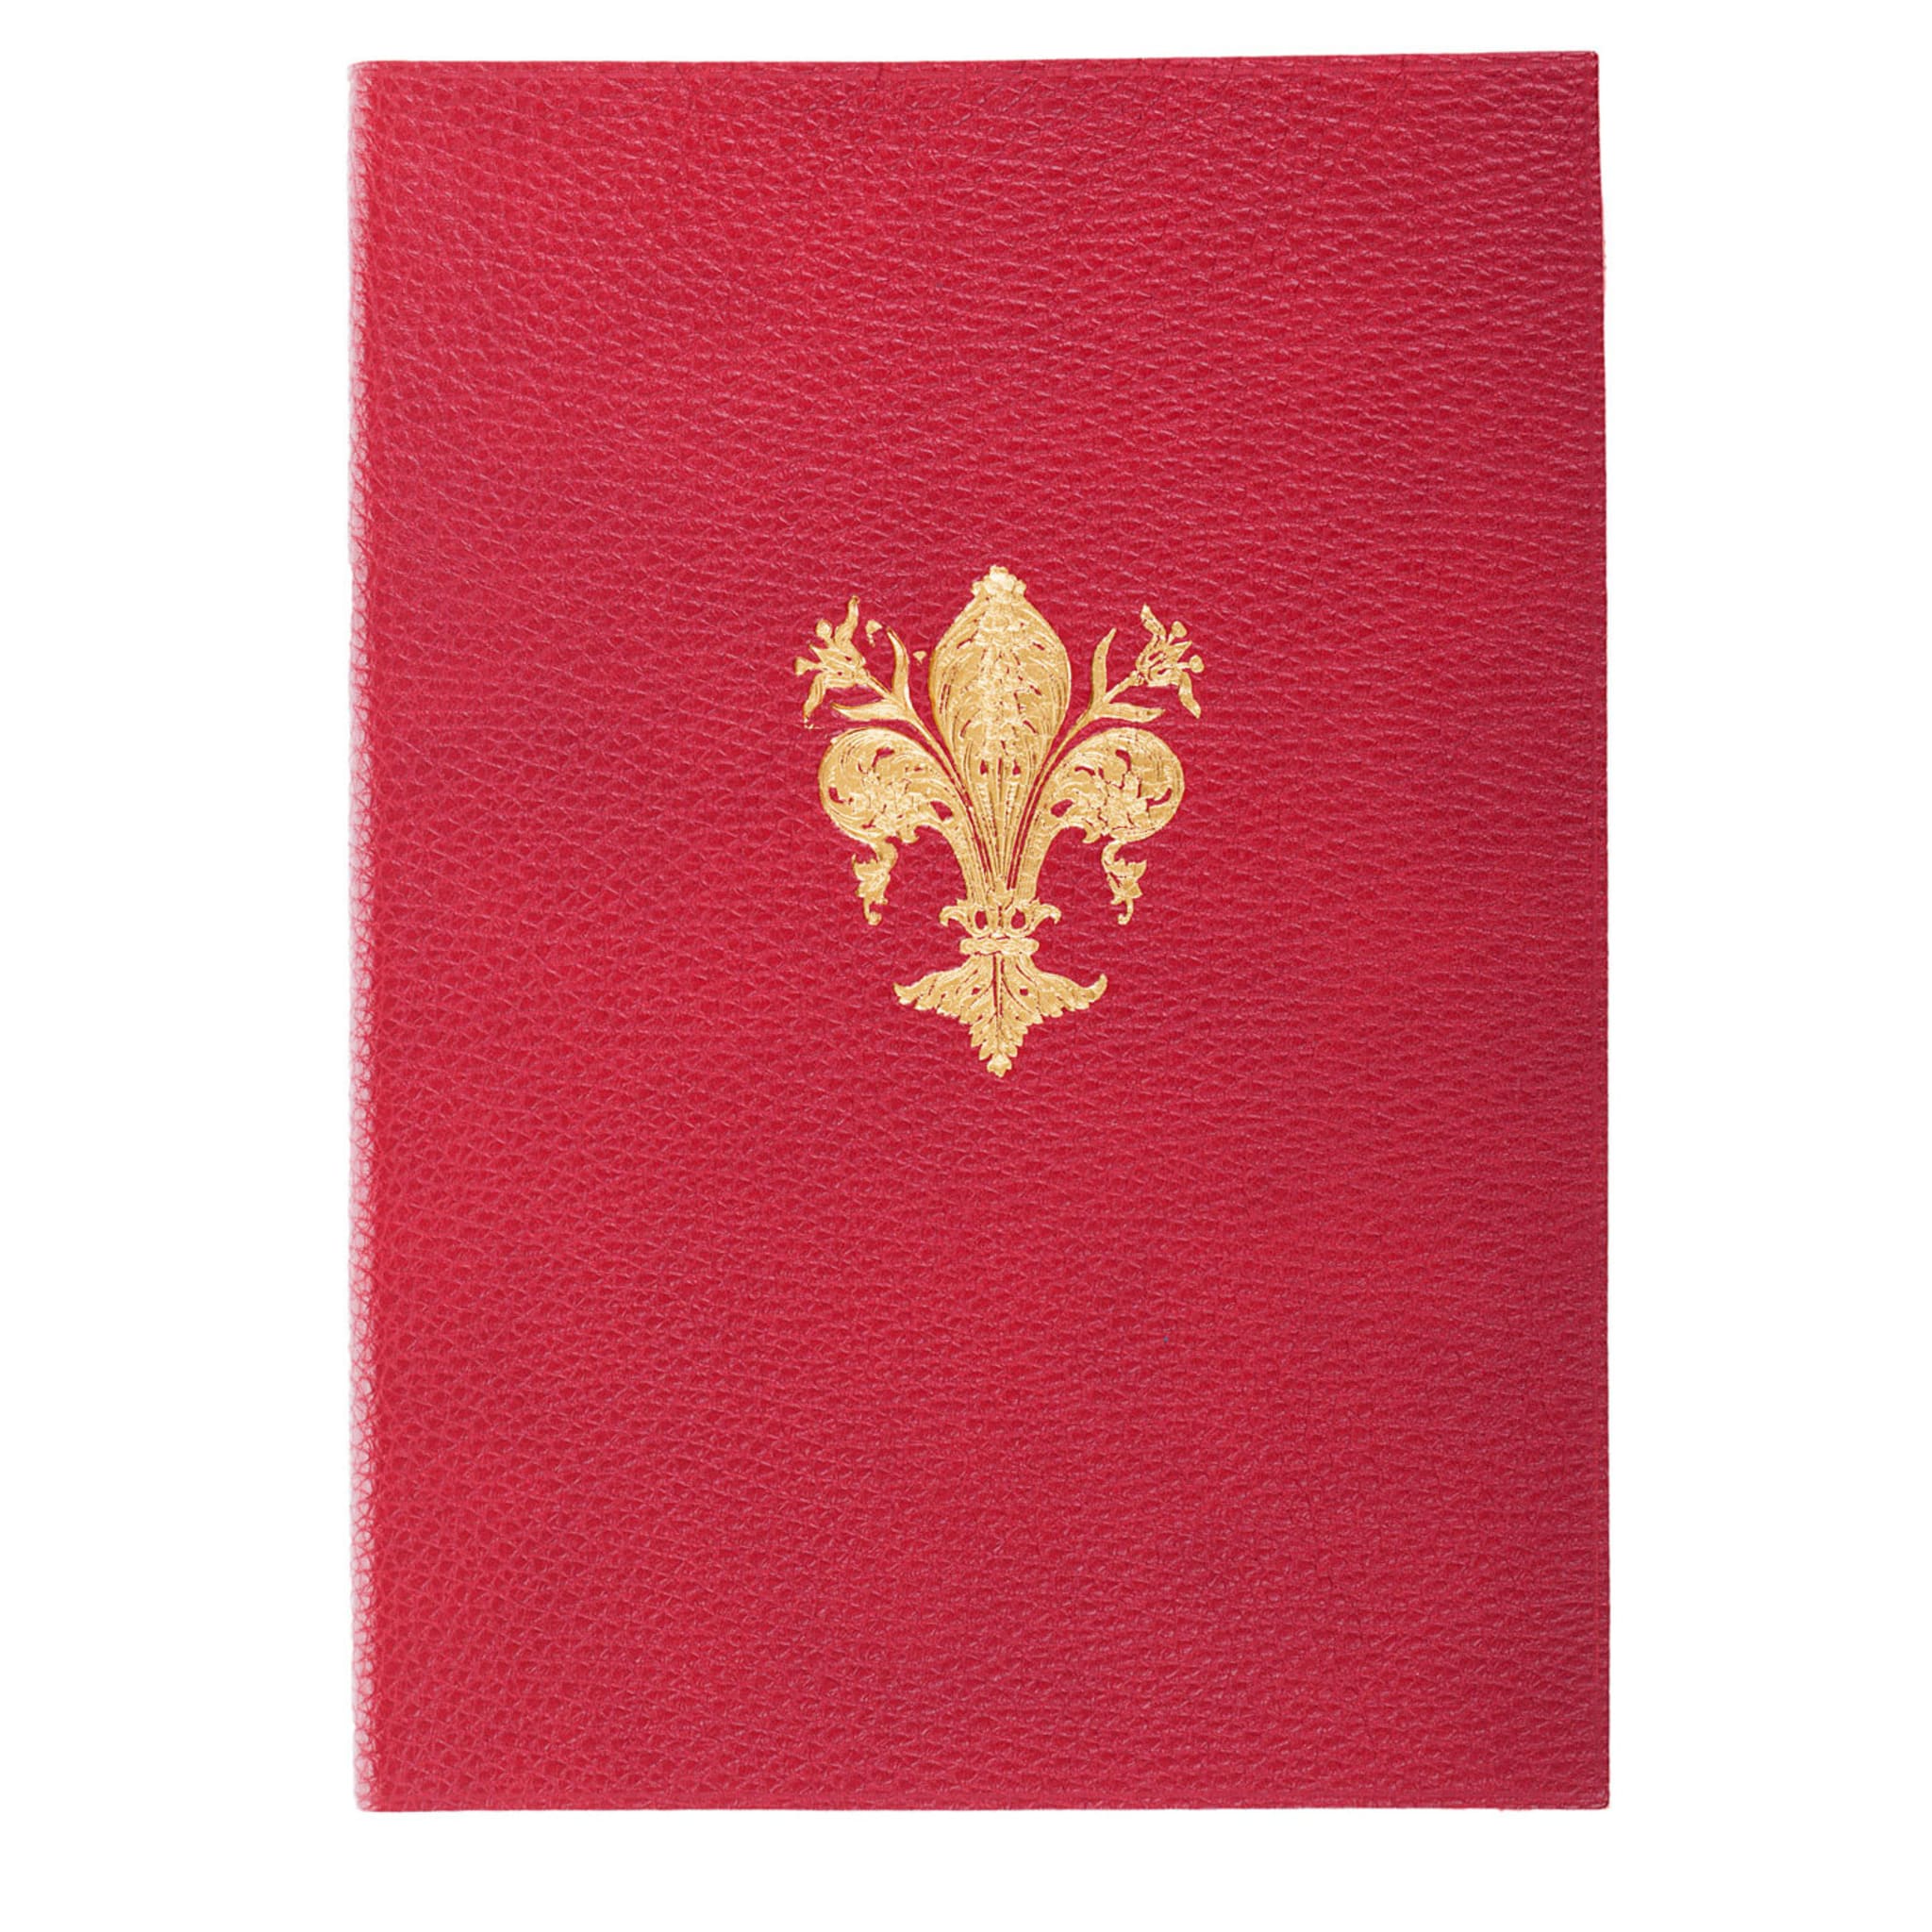 Gold Lily Red Leather Notebook - Alternative view 2